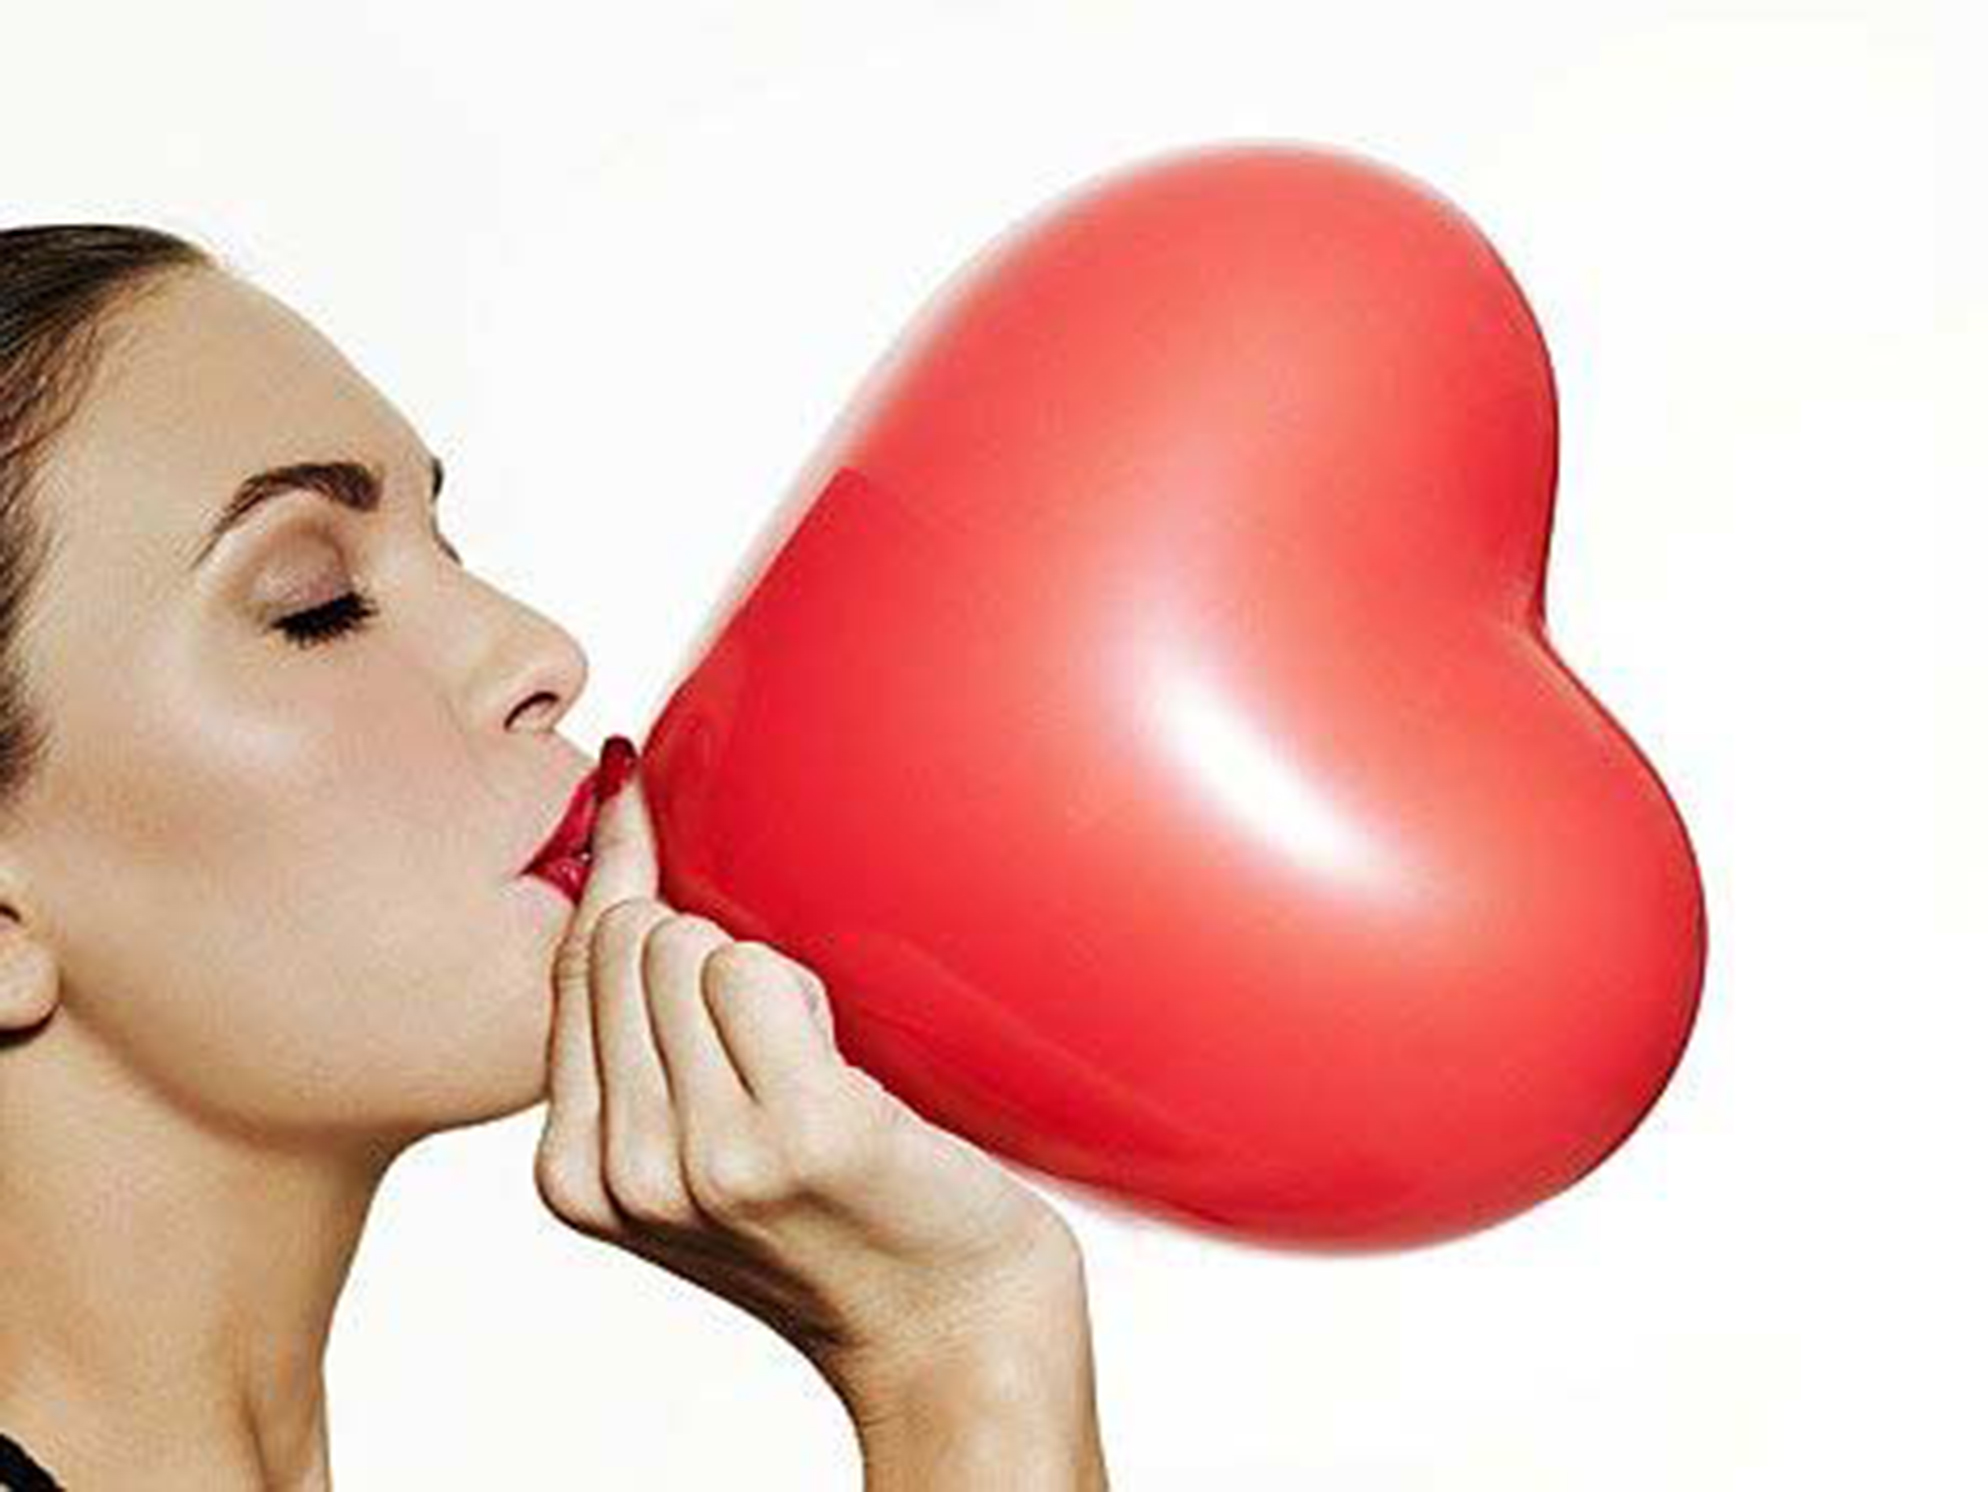 Woman blowing up a heart shaped balloon.